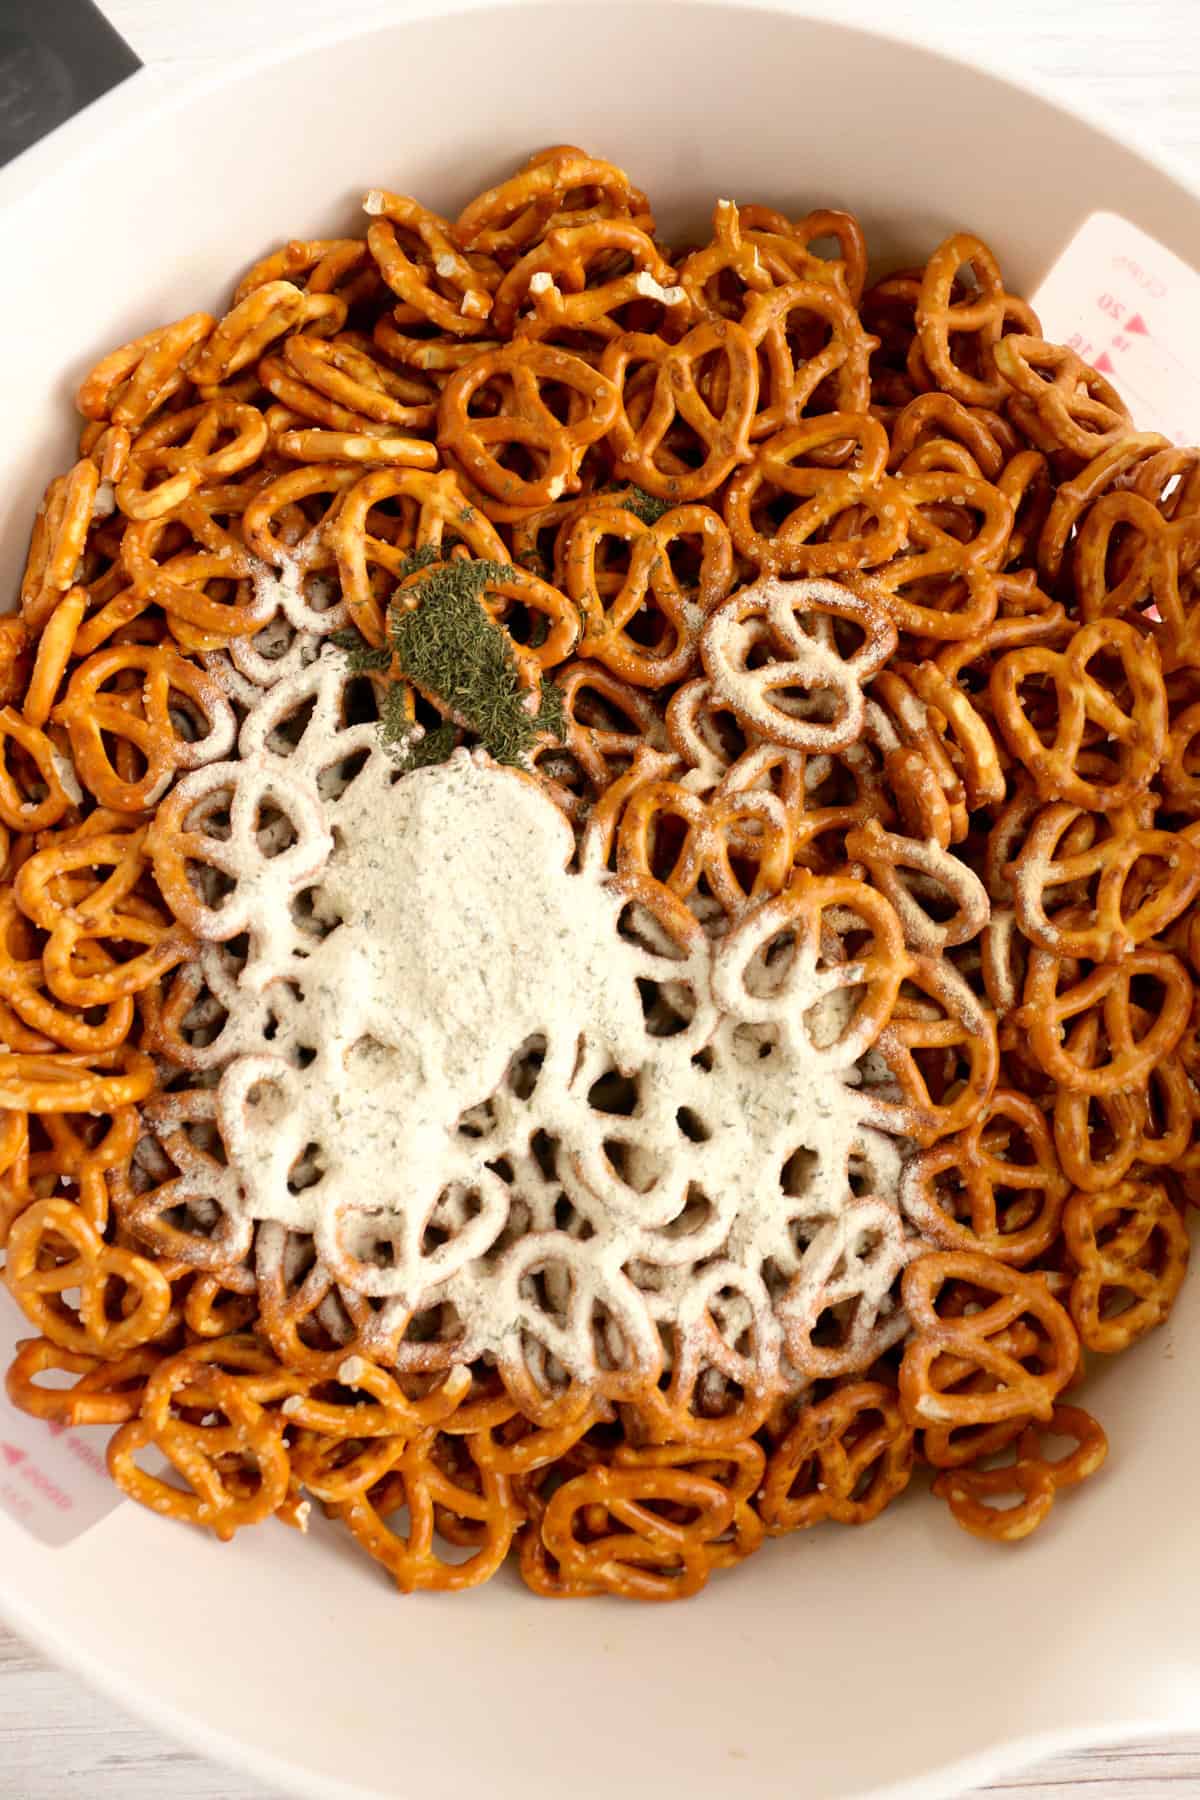 Ranch mix and other seasonings sprinkled on top over pretzel twists in a large bowl.